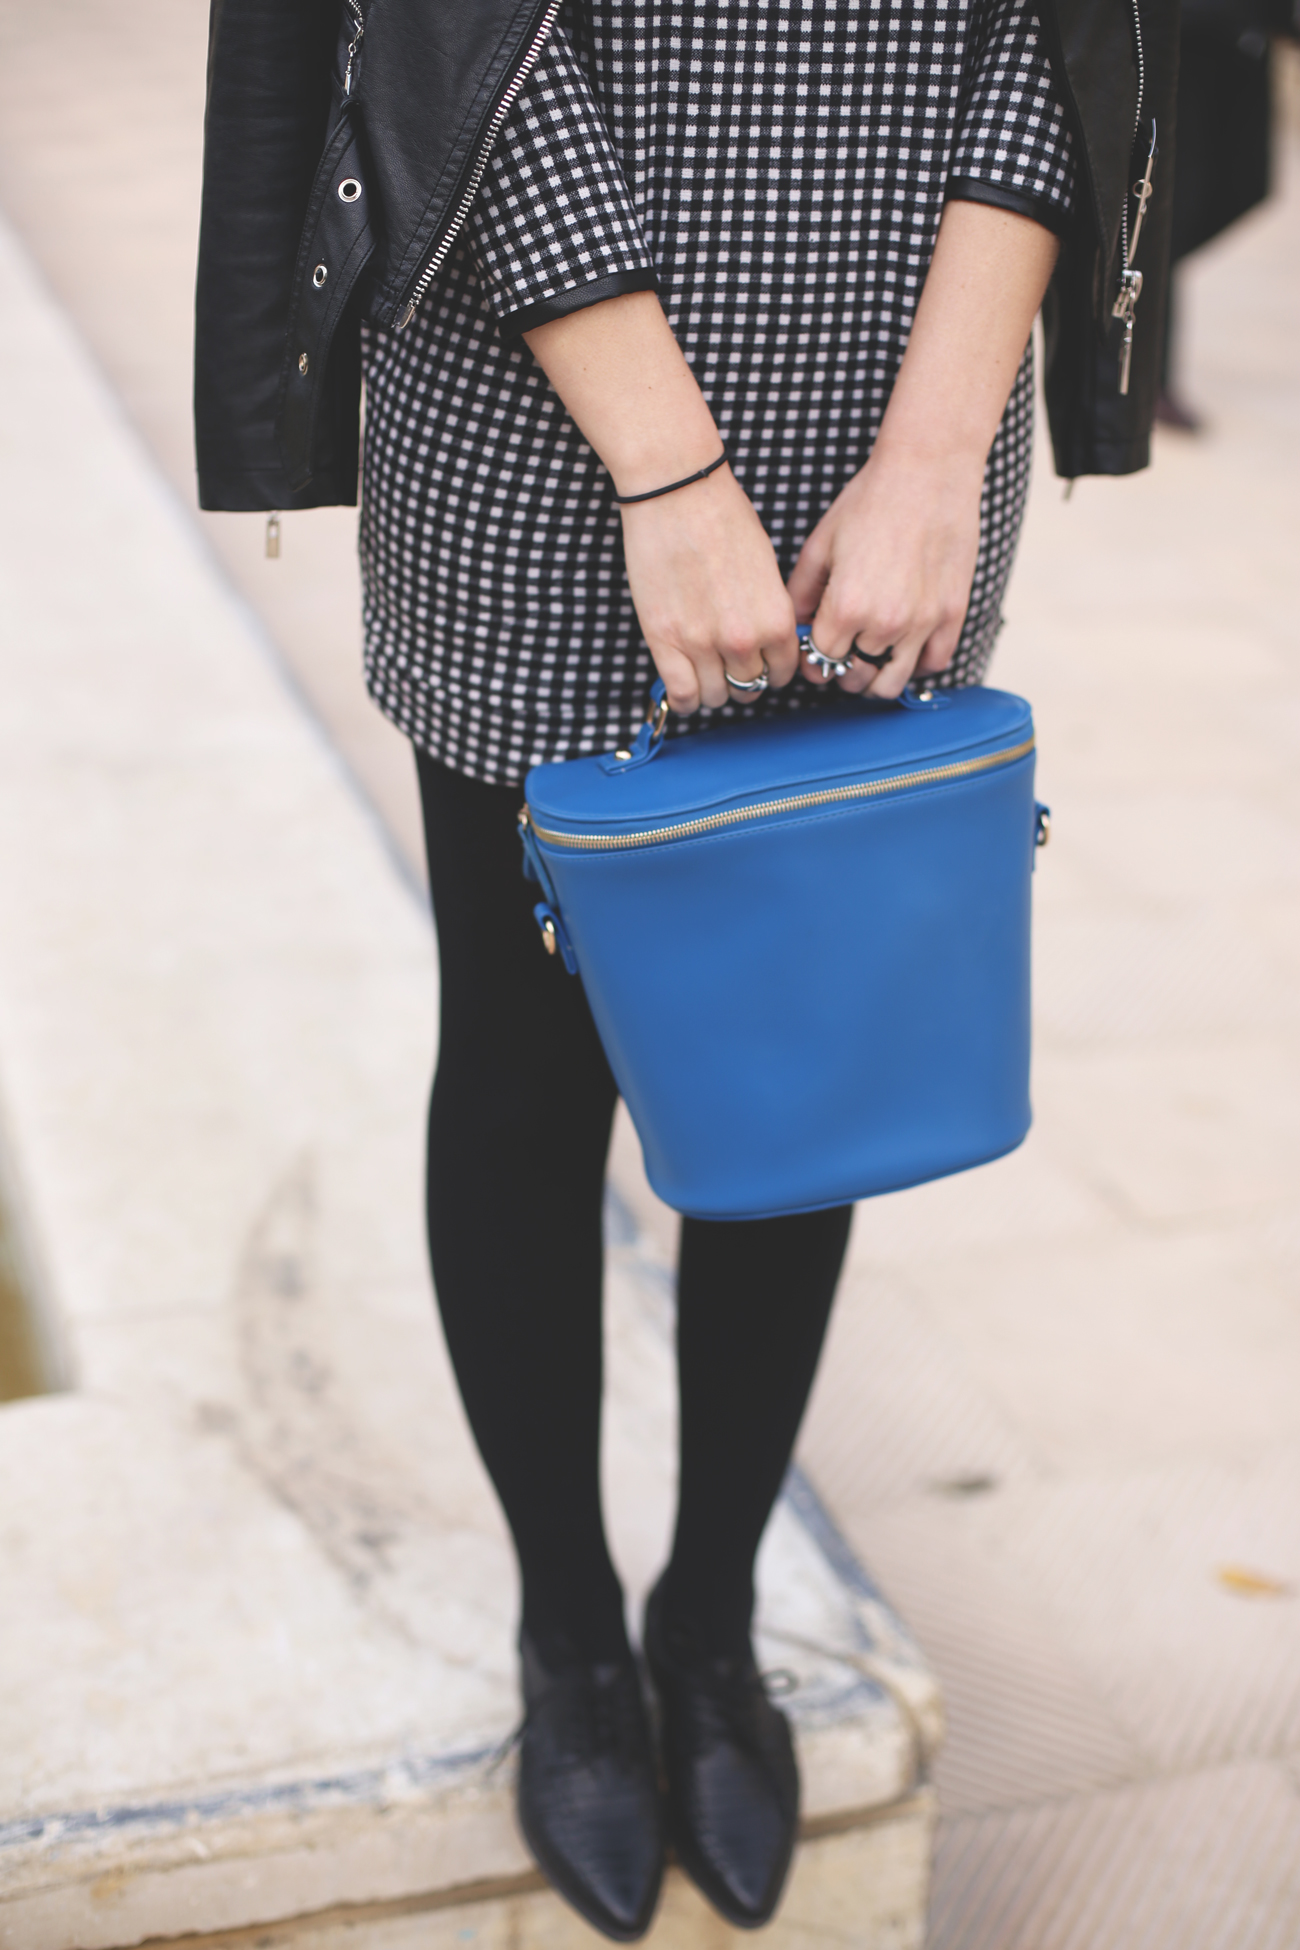 klein color, retro bag, black and white, leather, studded, mod style, flats, cool outfit